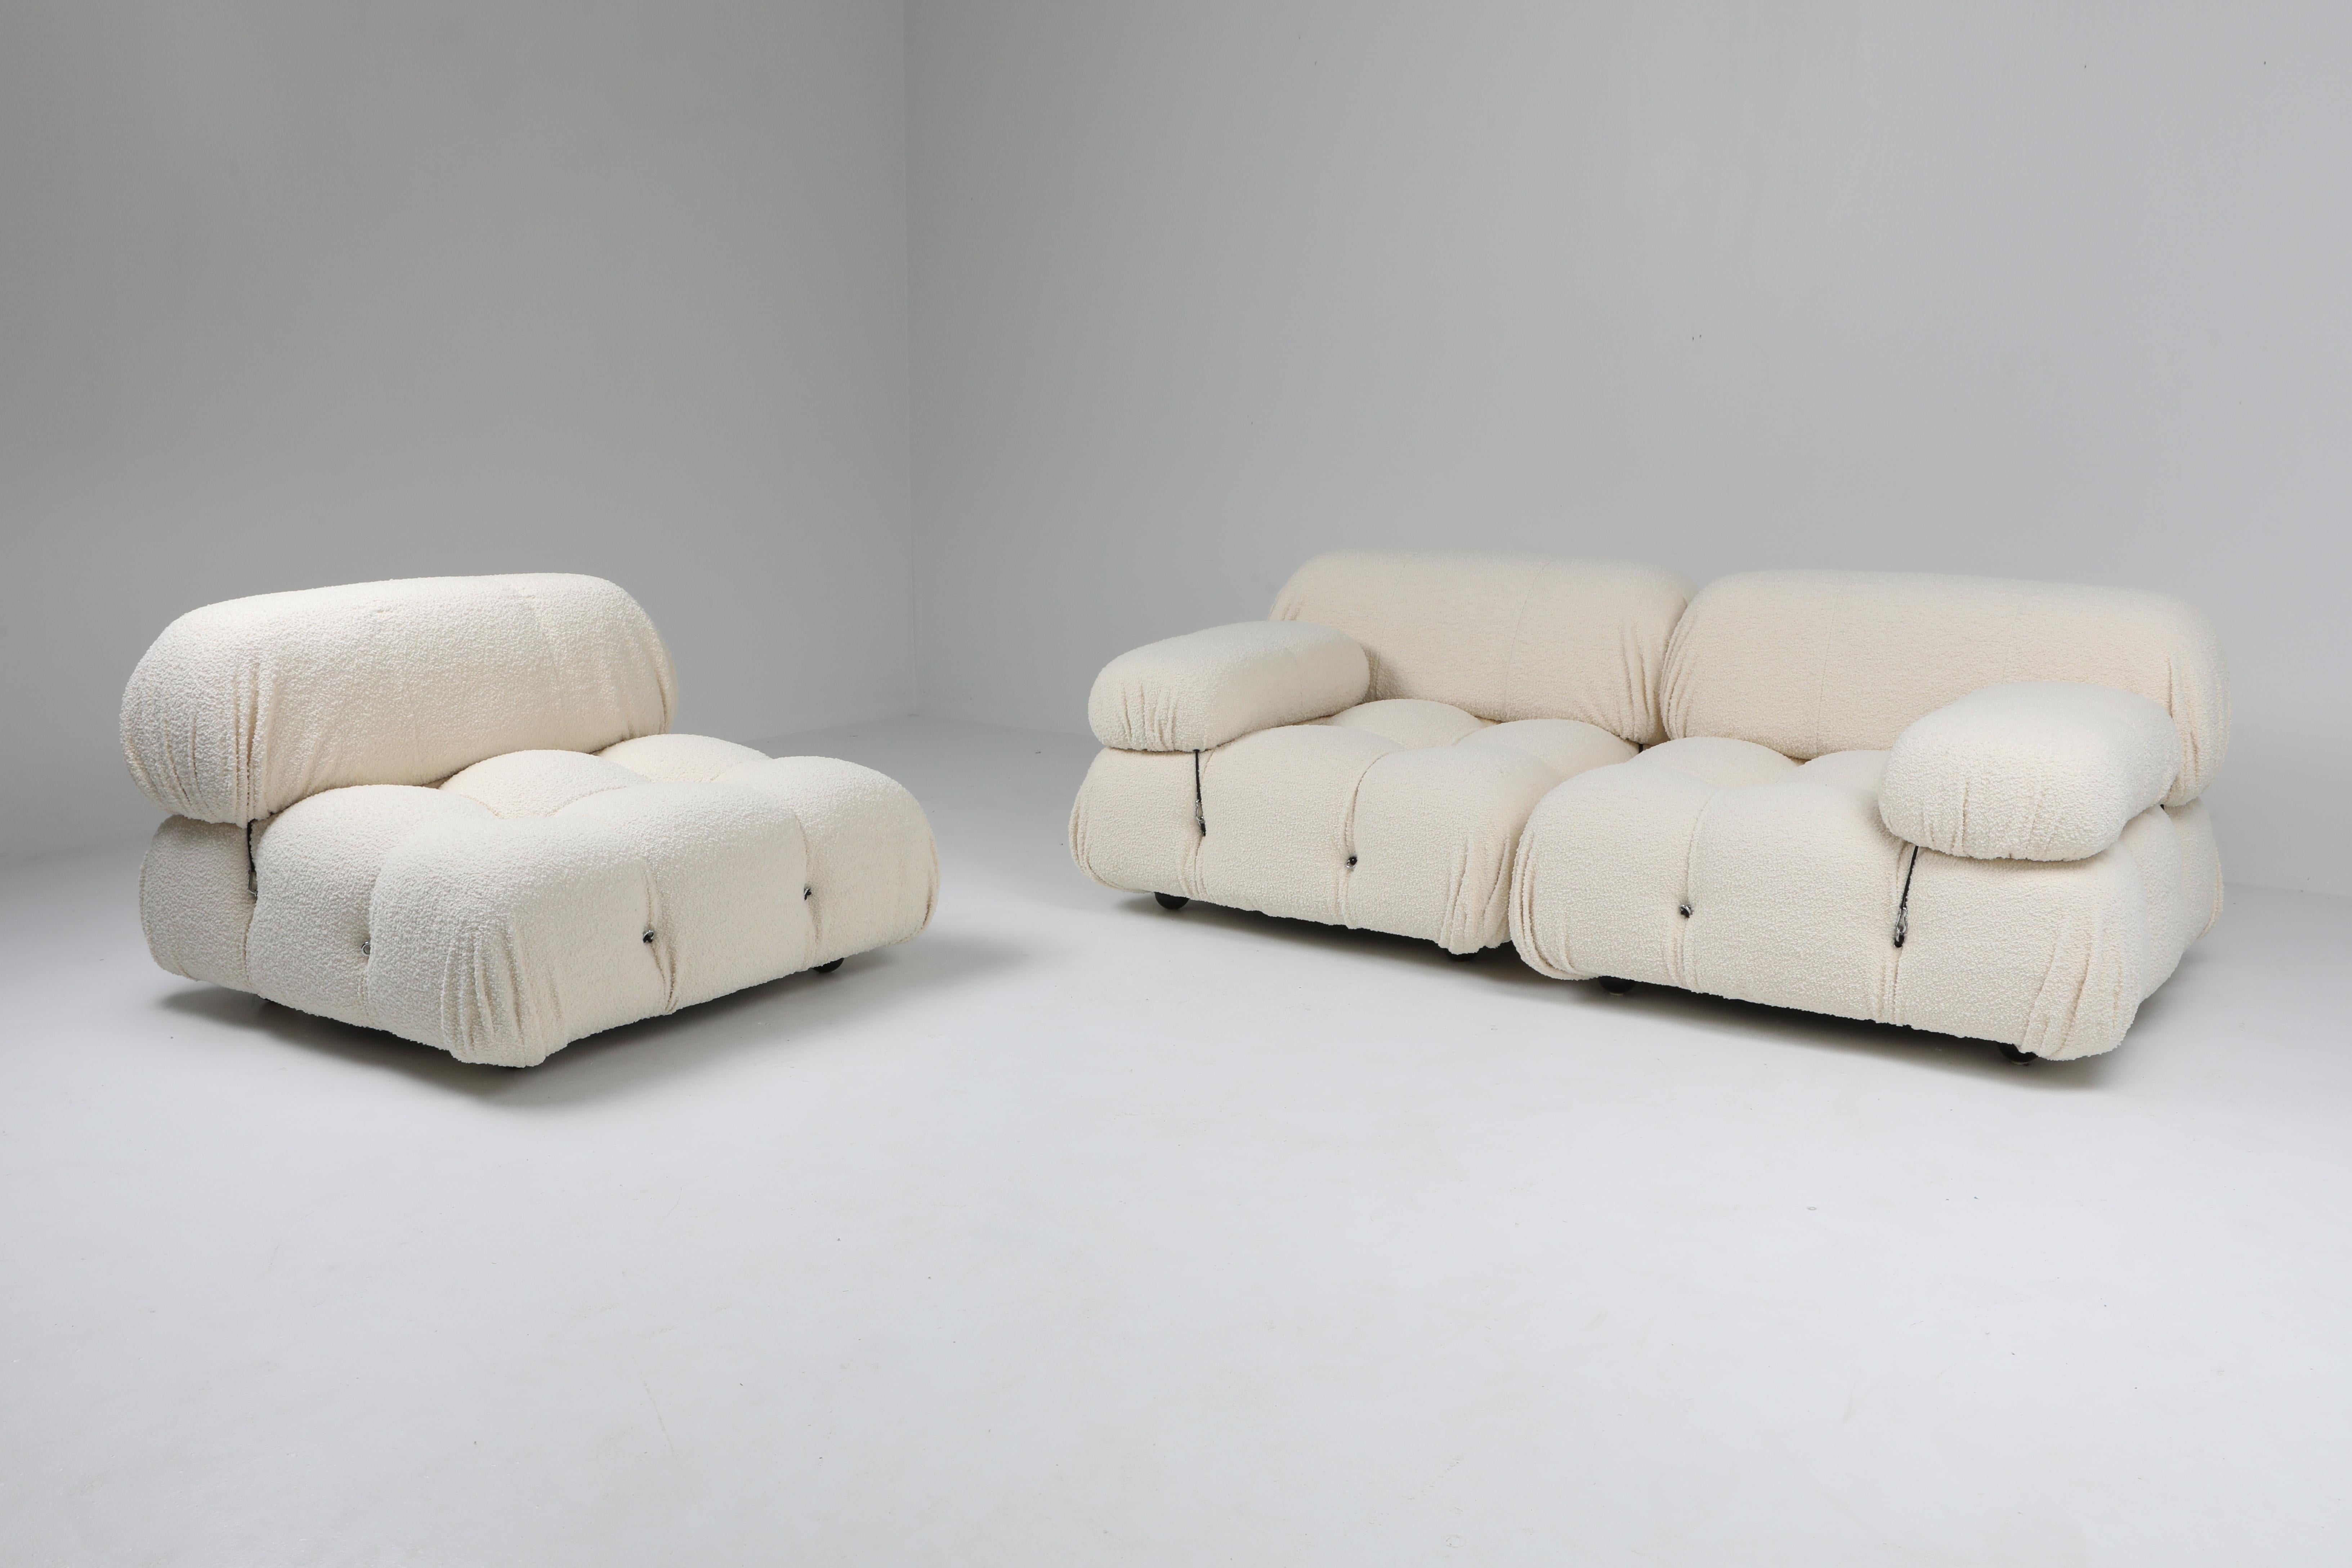 Italian Camaleonda Sofa Set in Boucle Wool with Armrests by Mario Bellini, 1970's For Sale